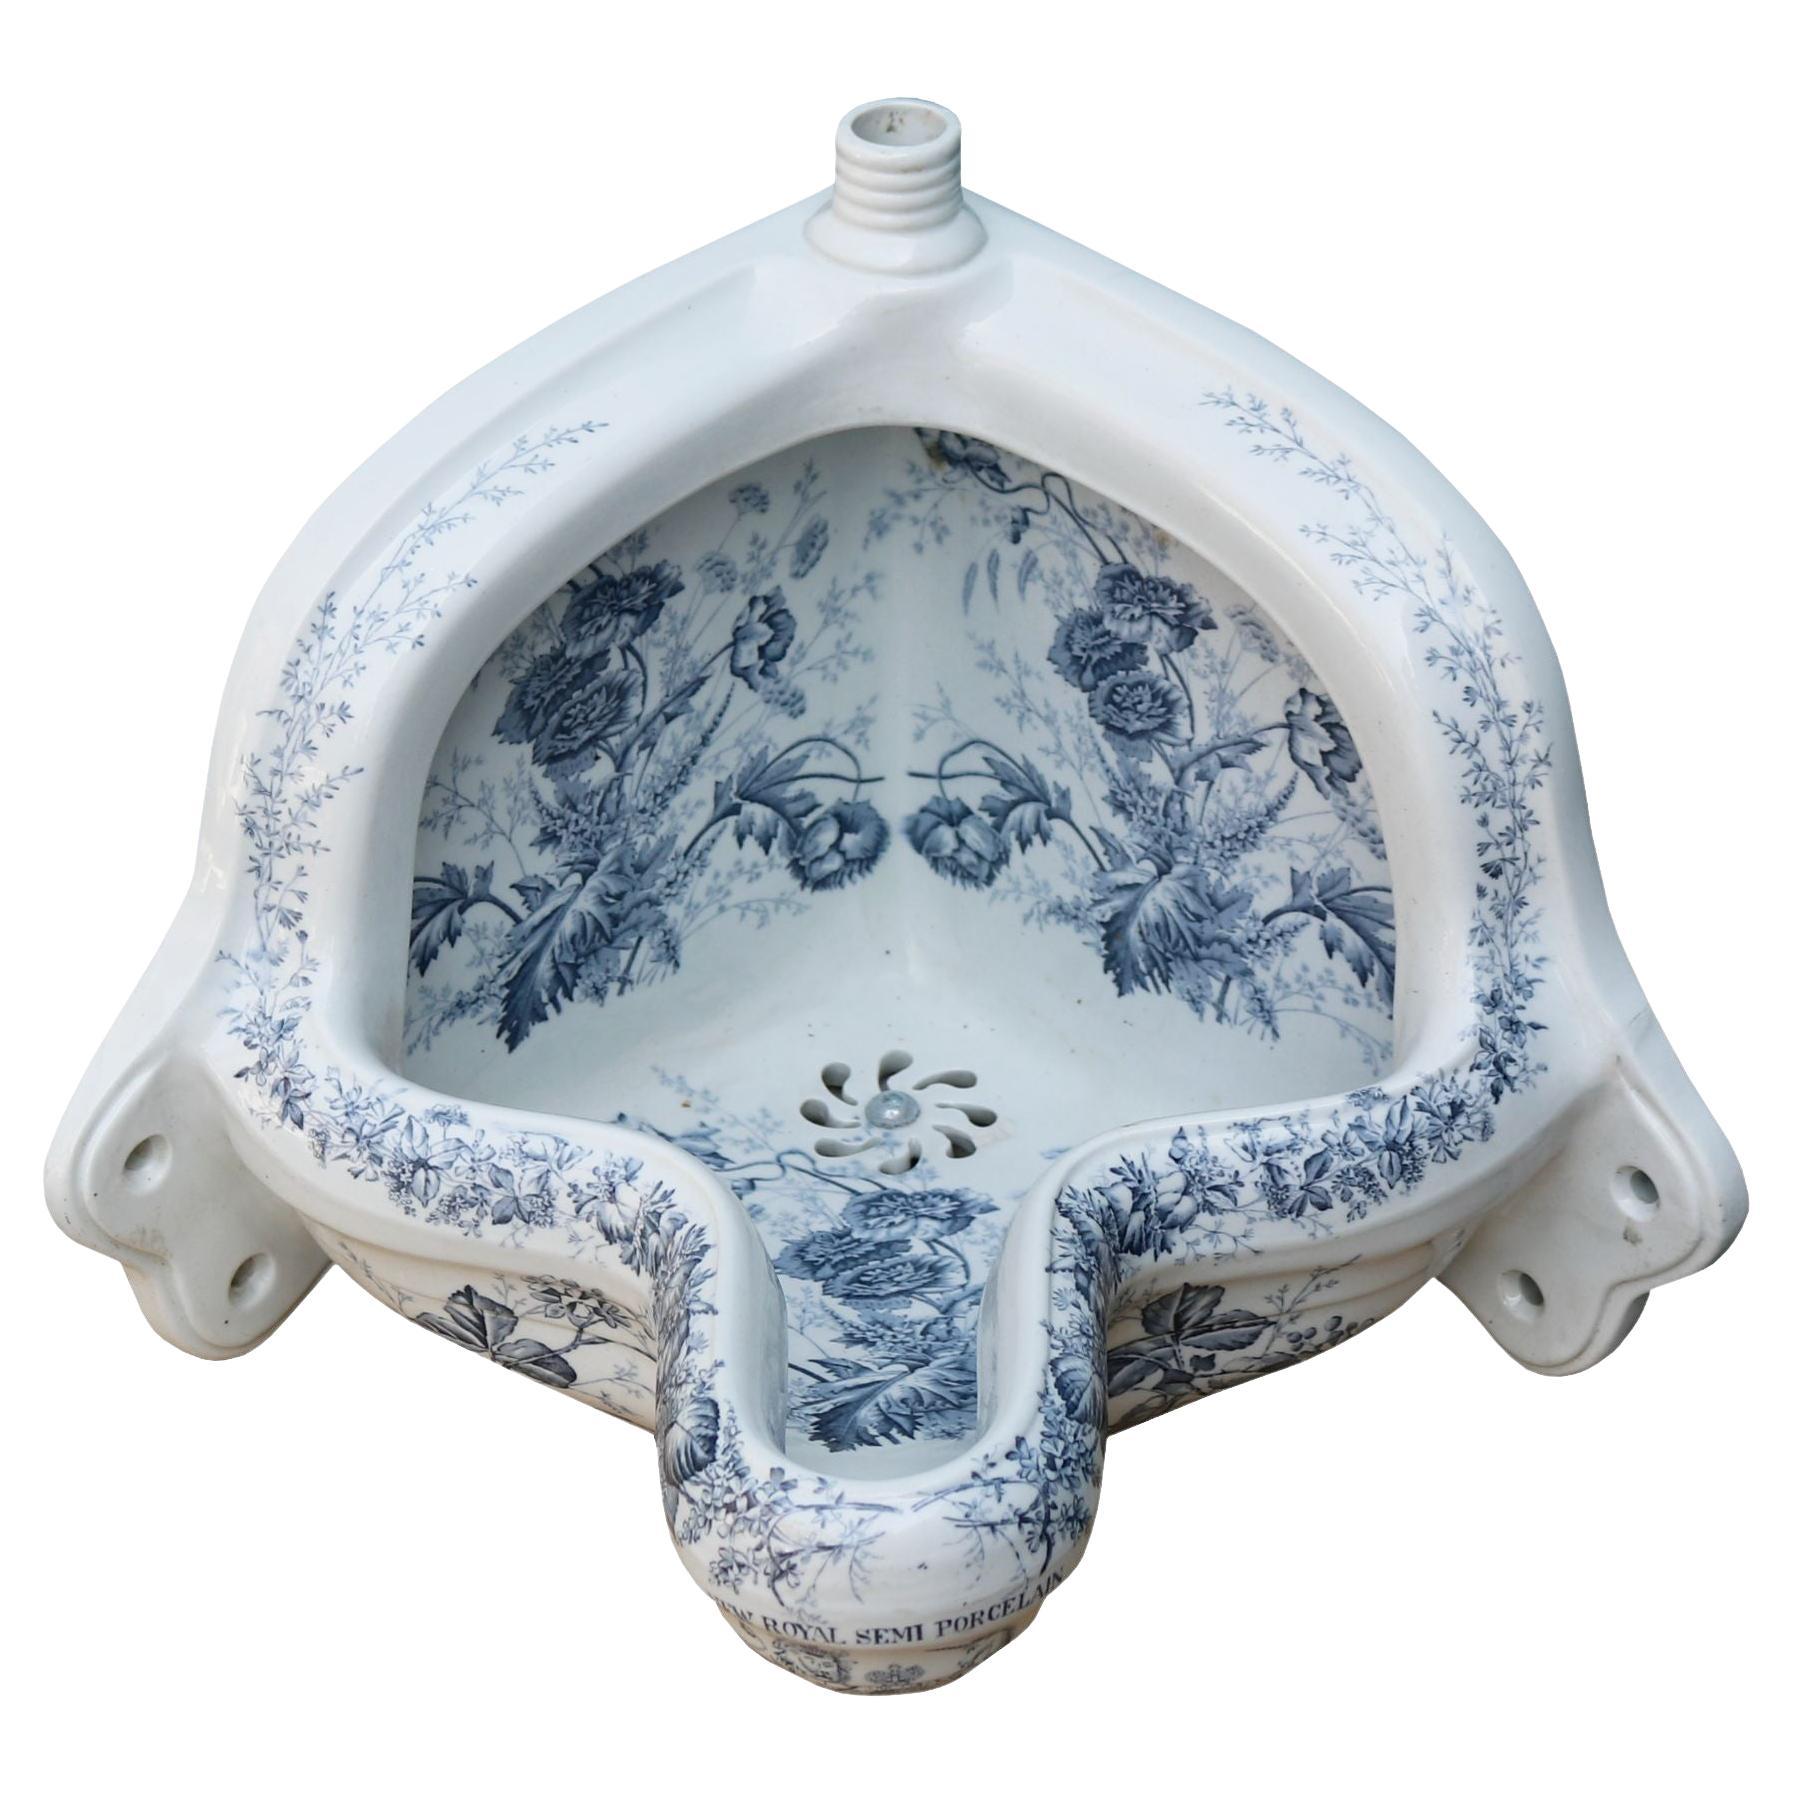 Antique Decorative Corner Urinal with Floral Pattern For Sale